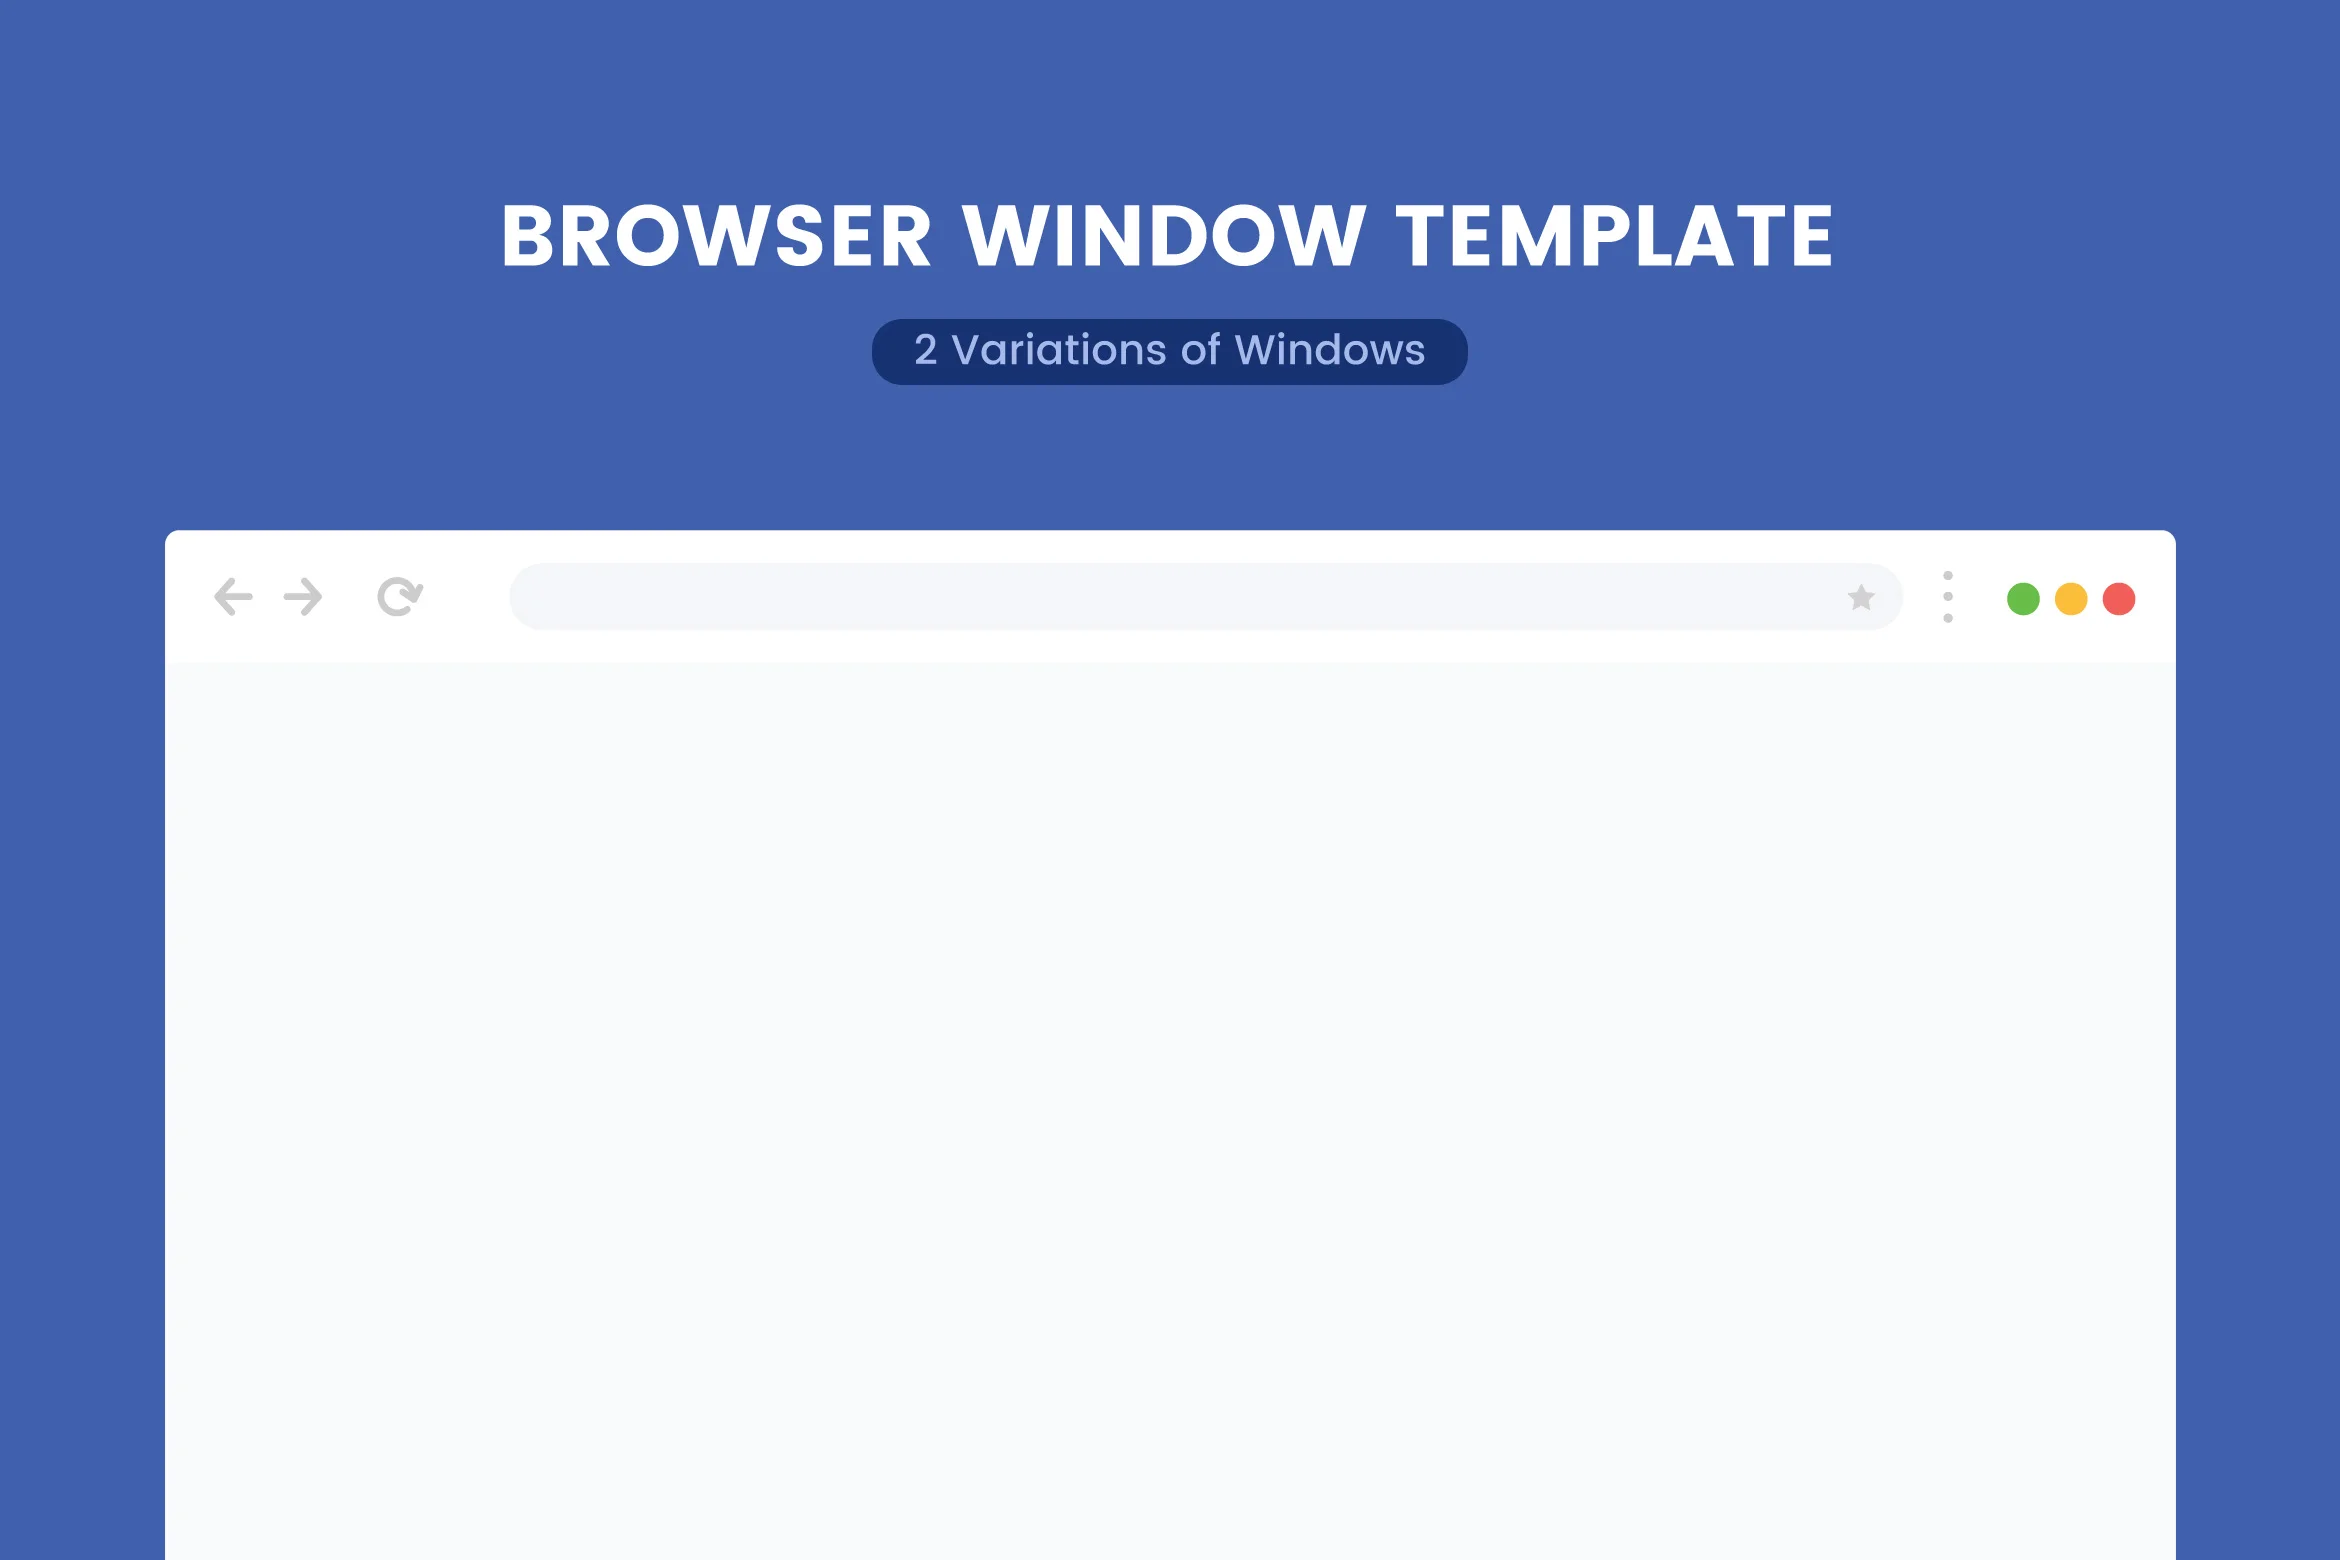 Browser Window Template